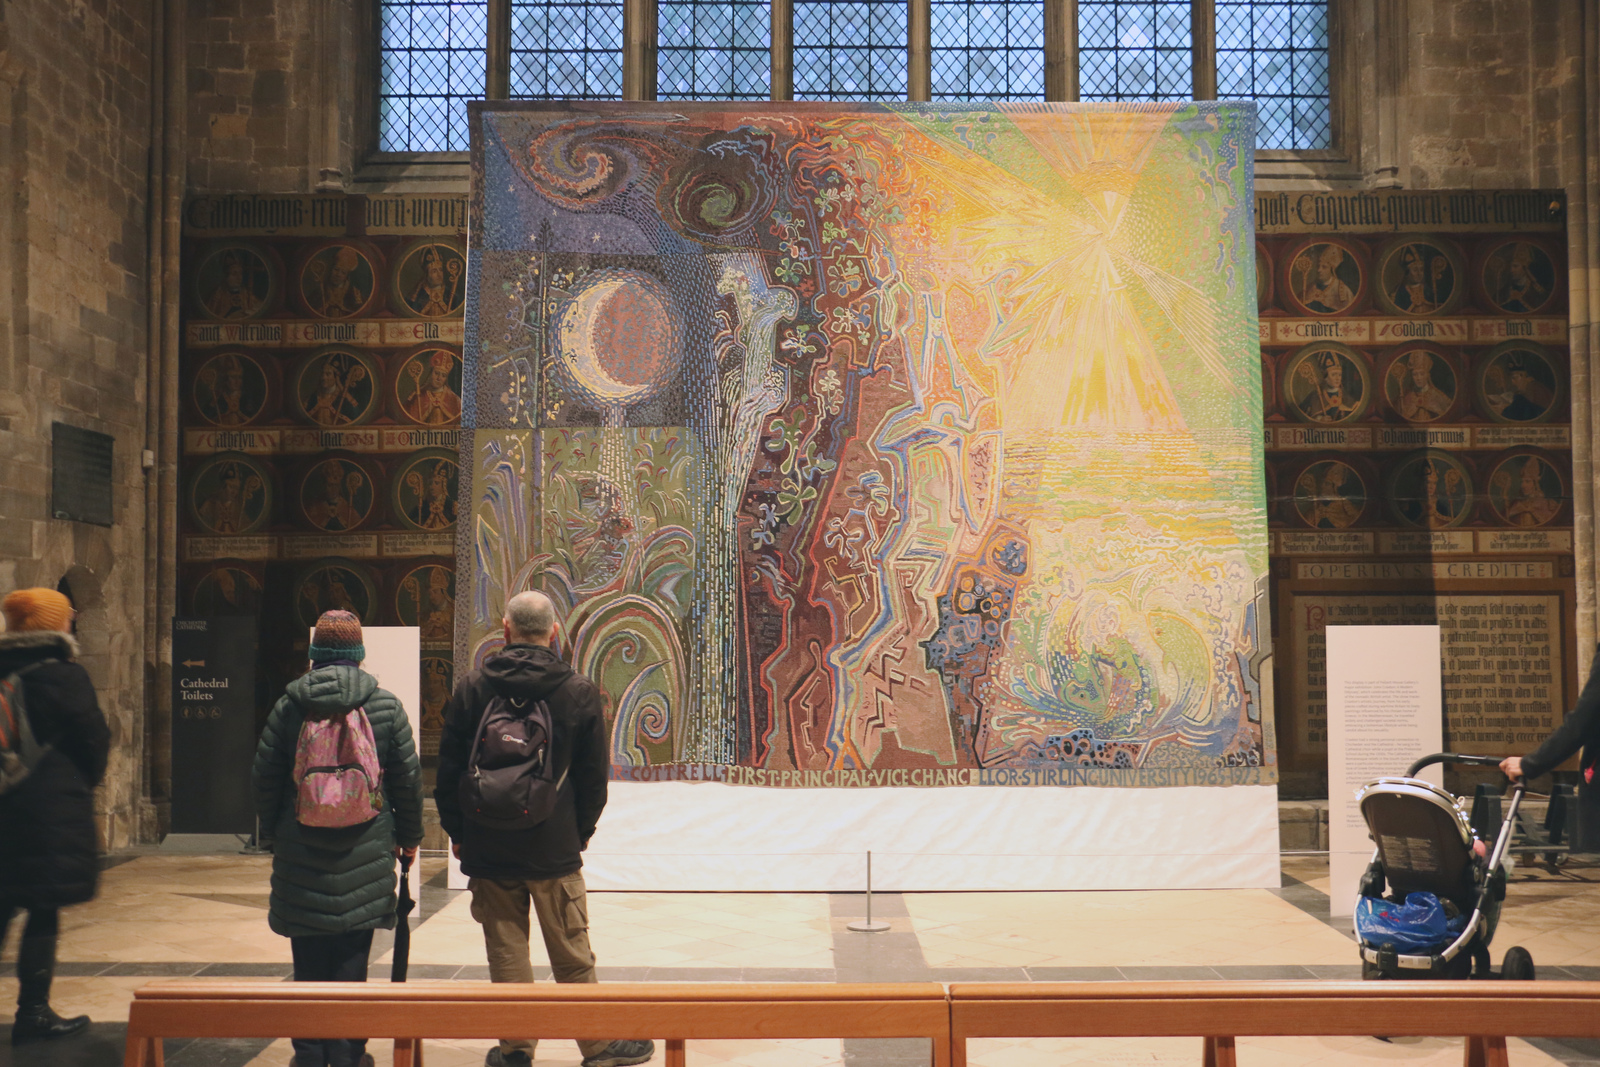 People admiring the large tapestry with their backs to the camera 